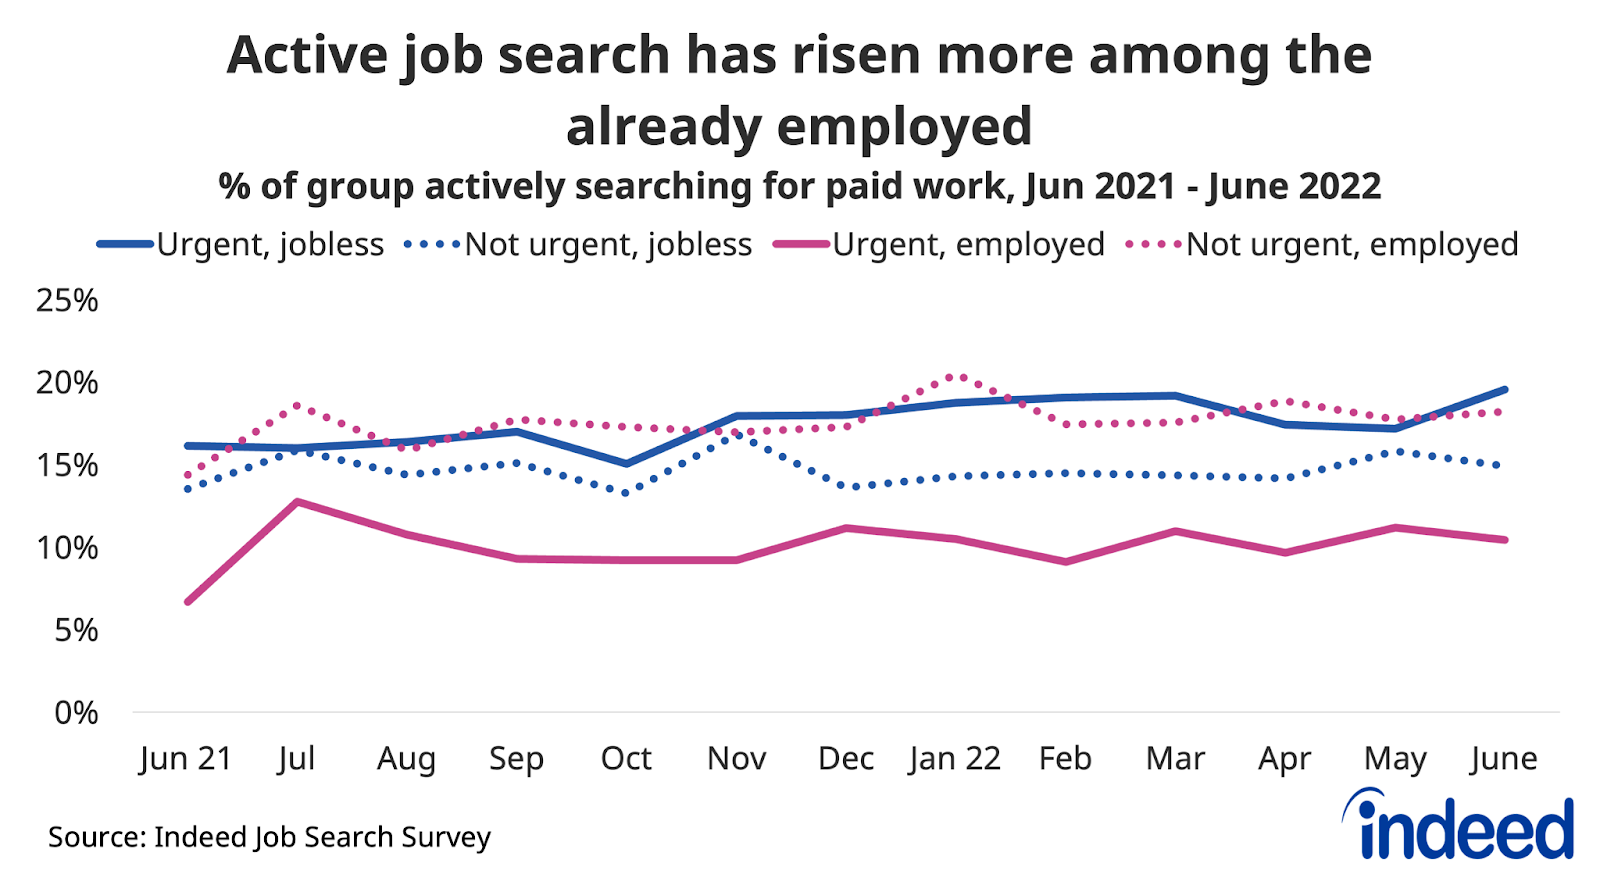 Line graph titled “Active job search has risen more among the already employed” 